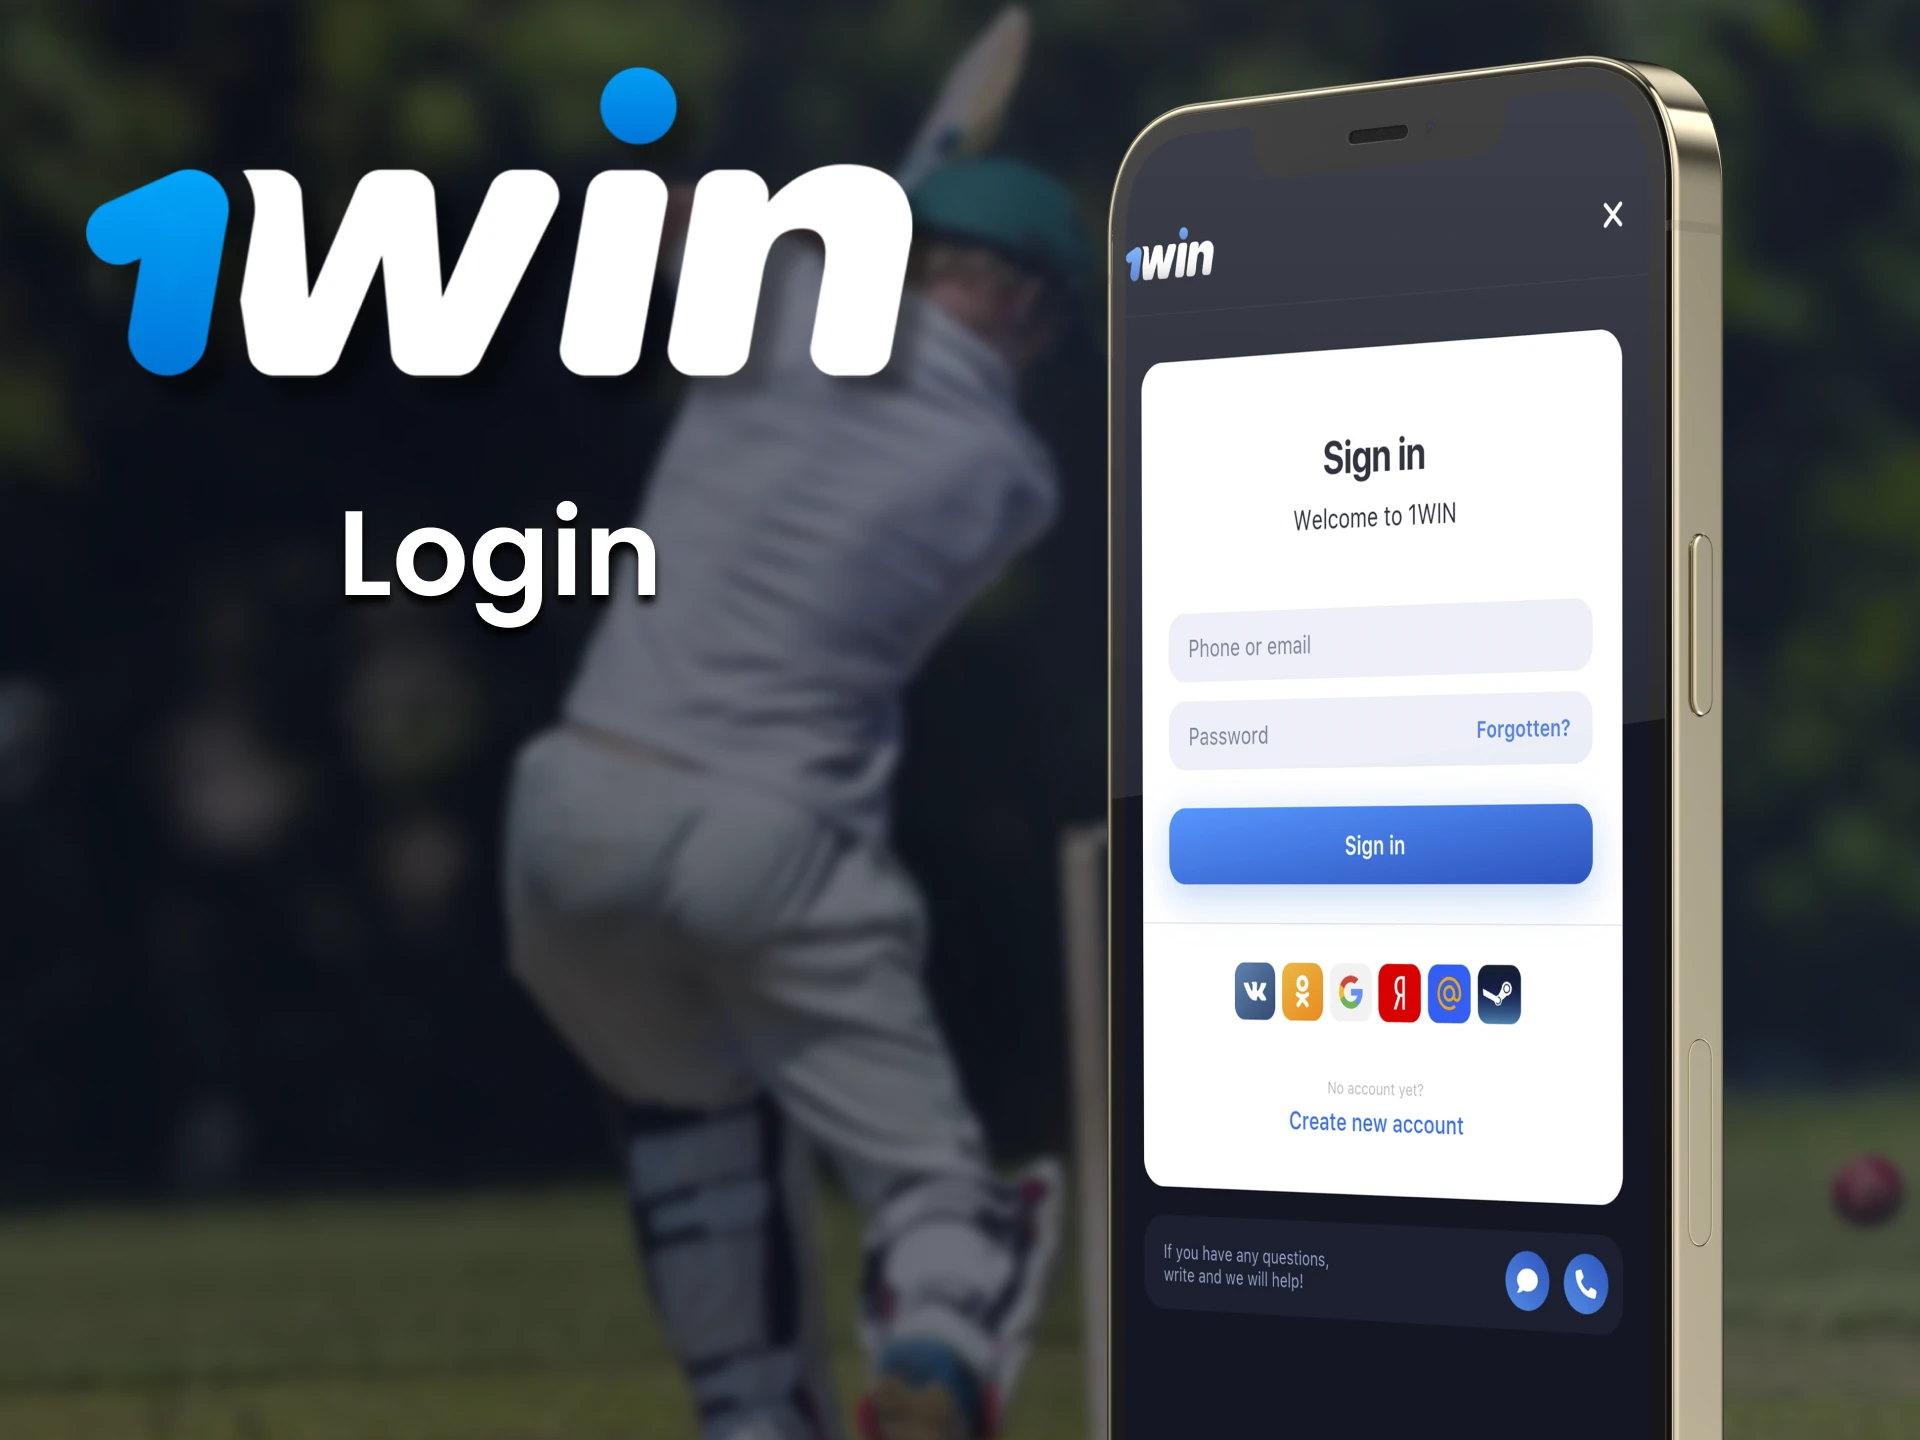 Log in to your personal 1win account in the app on your phone.